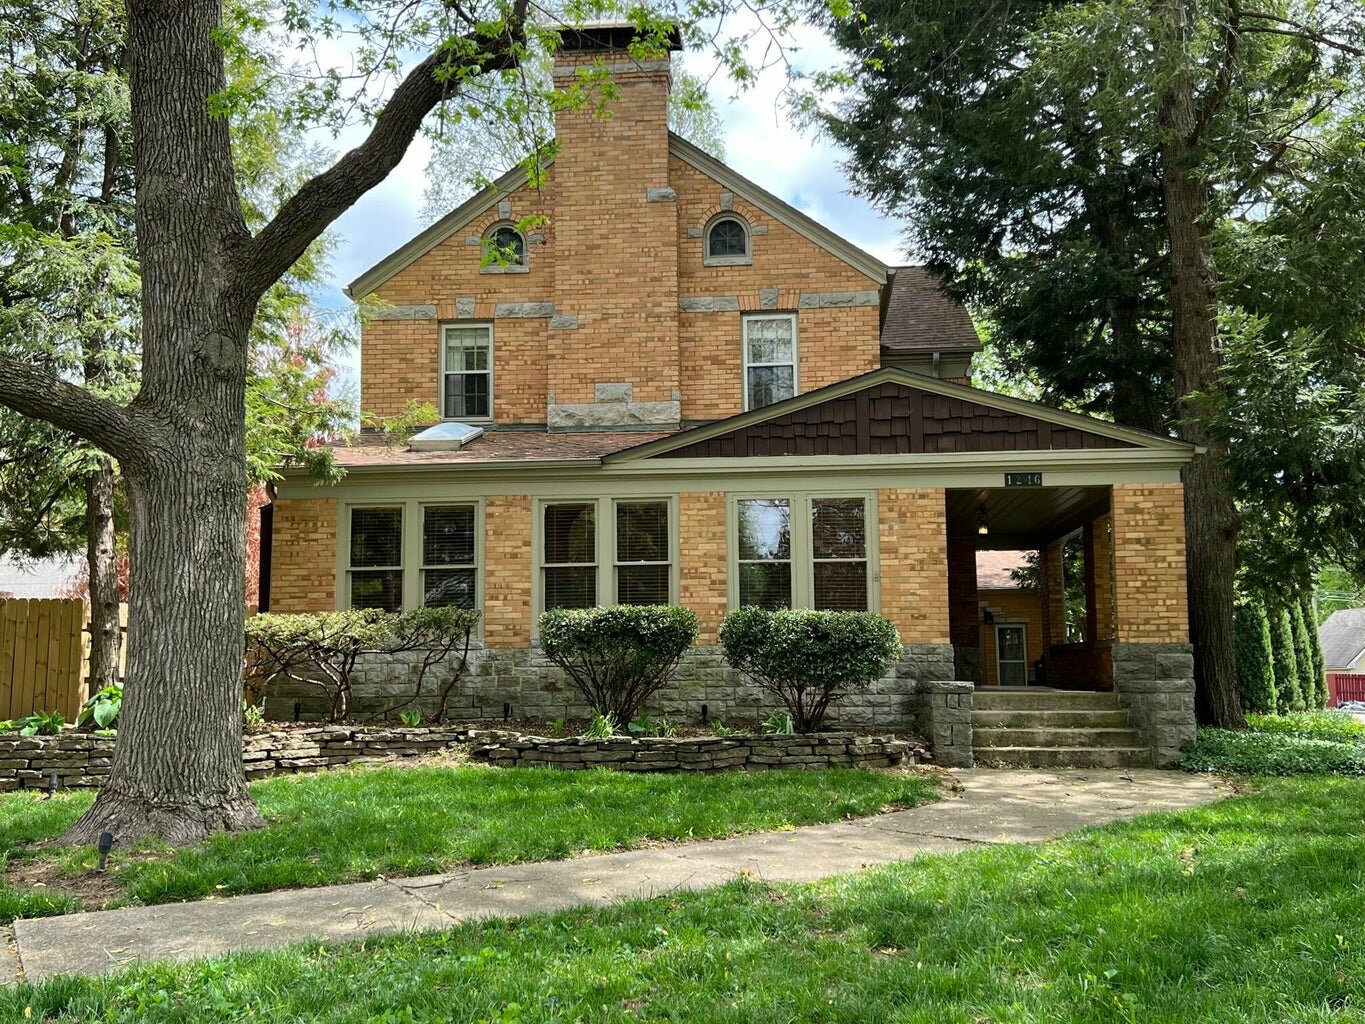 1246 S. Delaware Ave.
$799,900
Bedrooms: 5
Bathrooms: 4
Listing firm: Christopher Weich Realty